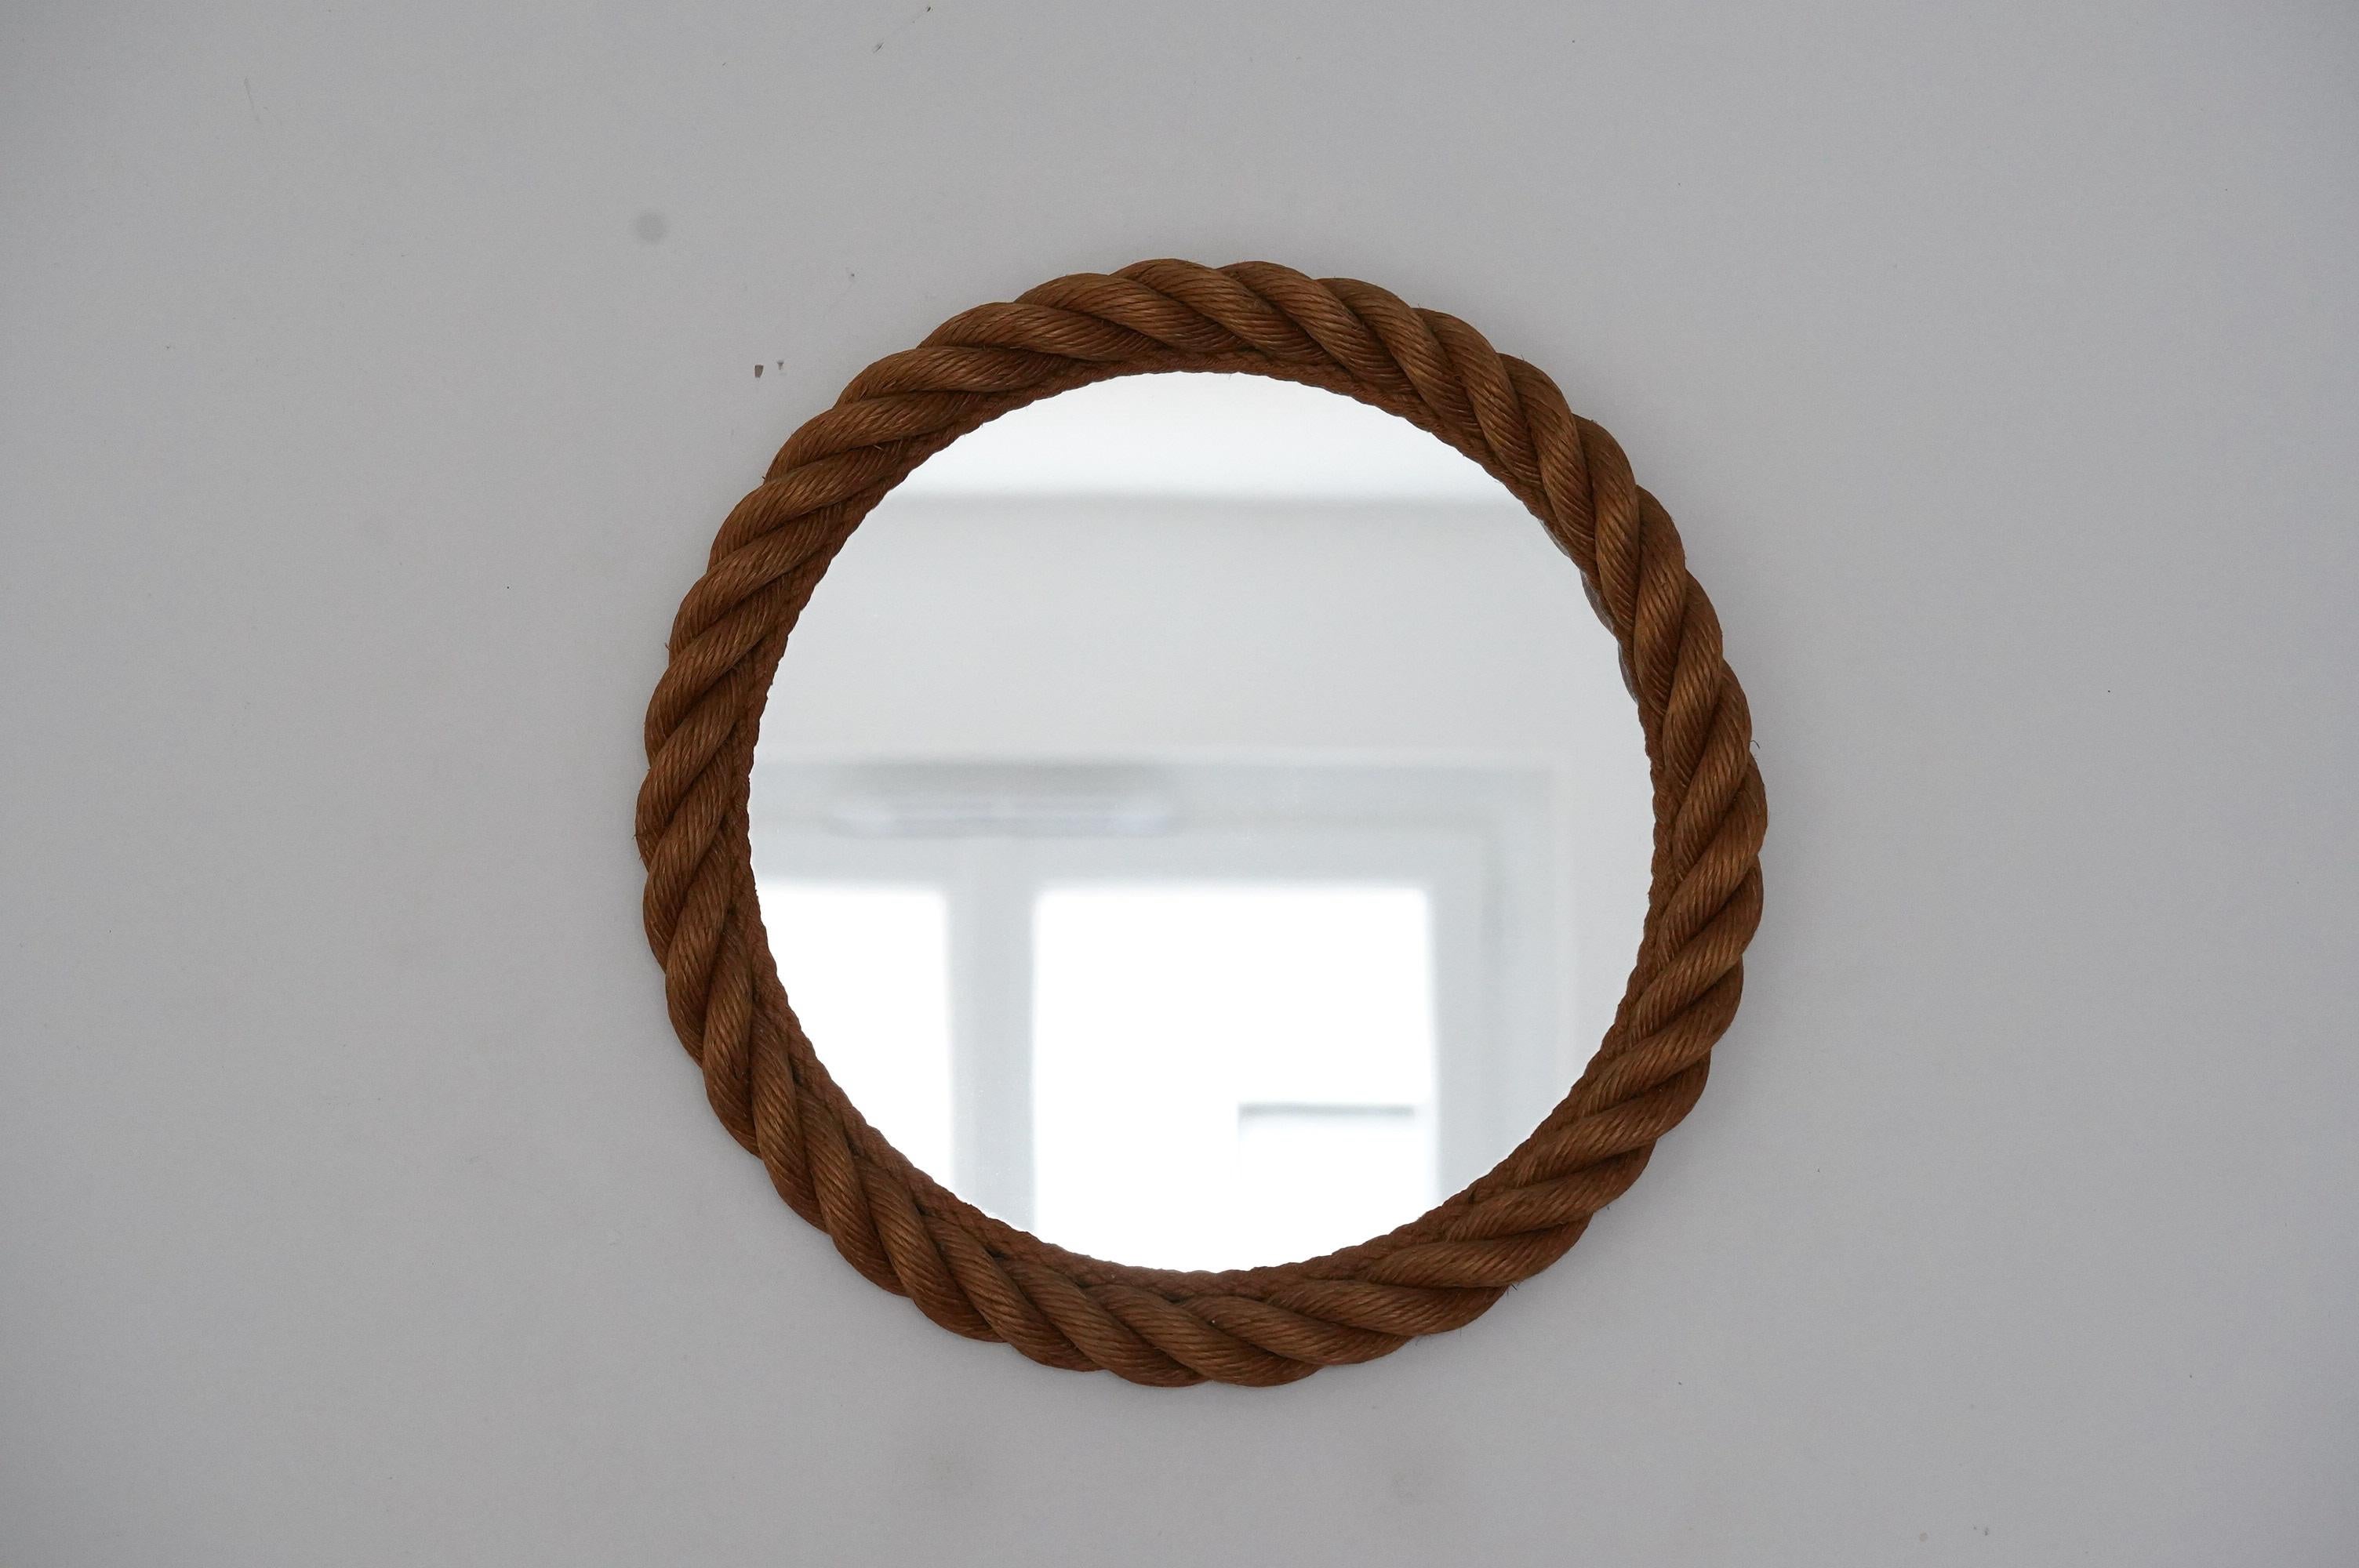 Large round rope mirror by french designers Adrien Audoux and Frida Minnet.
Made in France in the 1950s.
Very decorative.